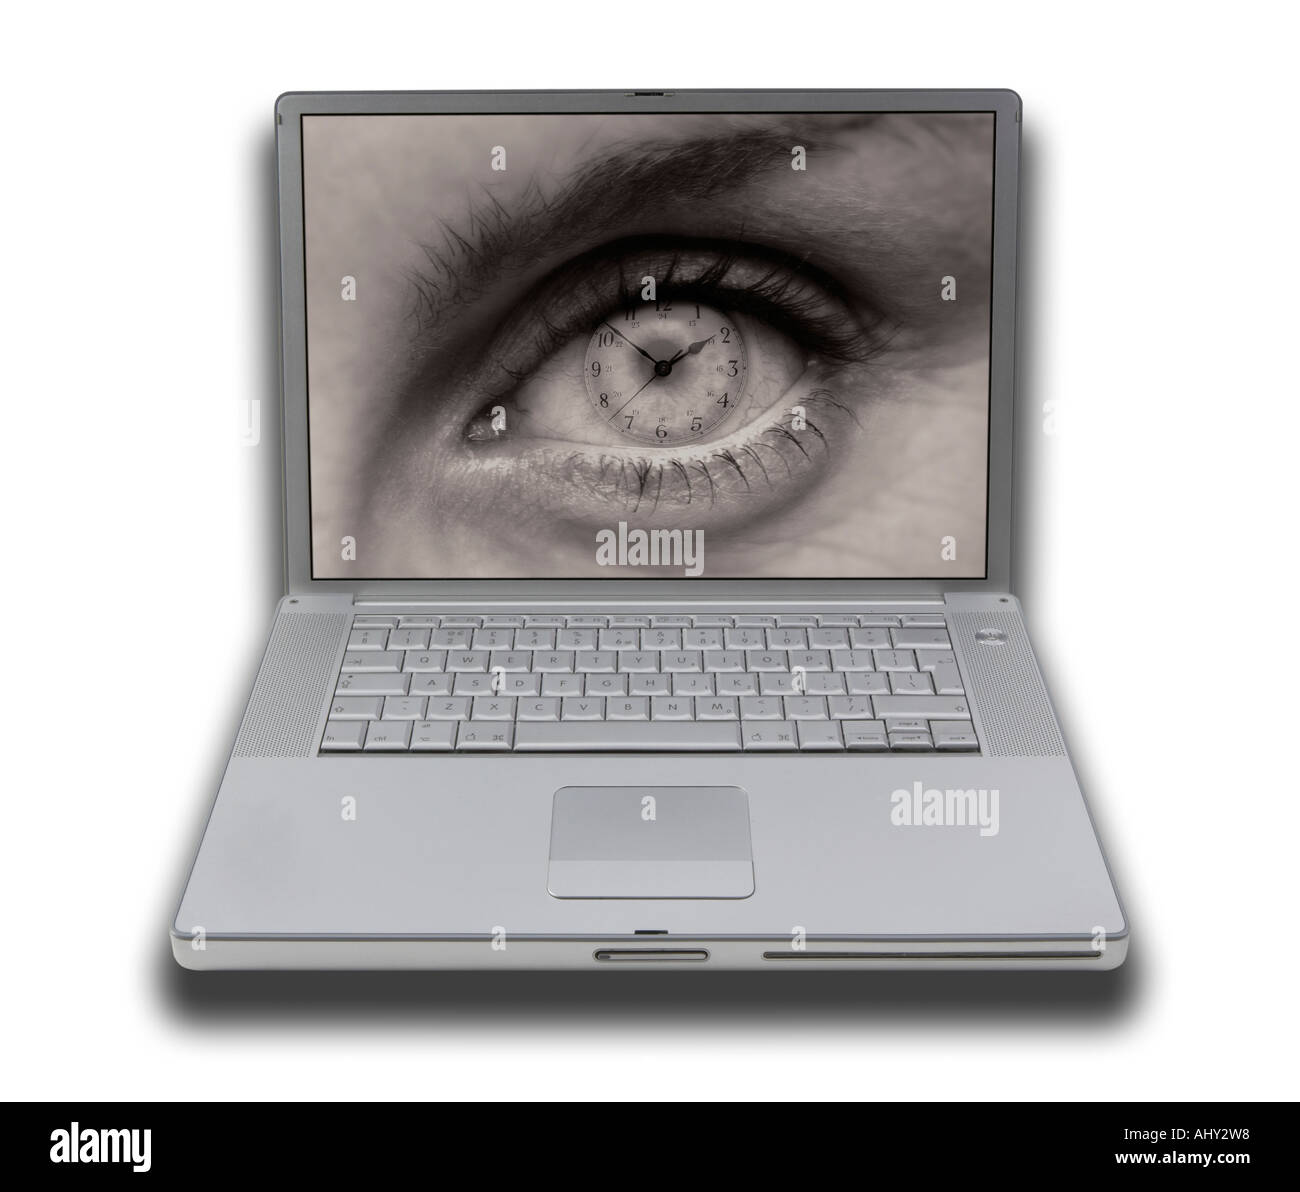 LAP TOP NOTE BOOK PERSONAL COMPUTER WITH SCREEN DISPLAYING PICTURE OF FEMALE EYE WITH CLOCK FACE IN PUPIL Stock Photo